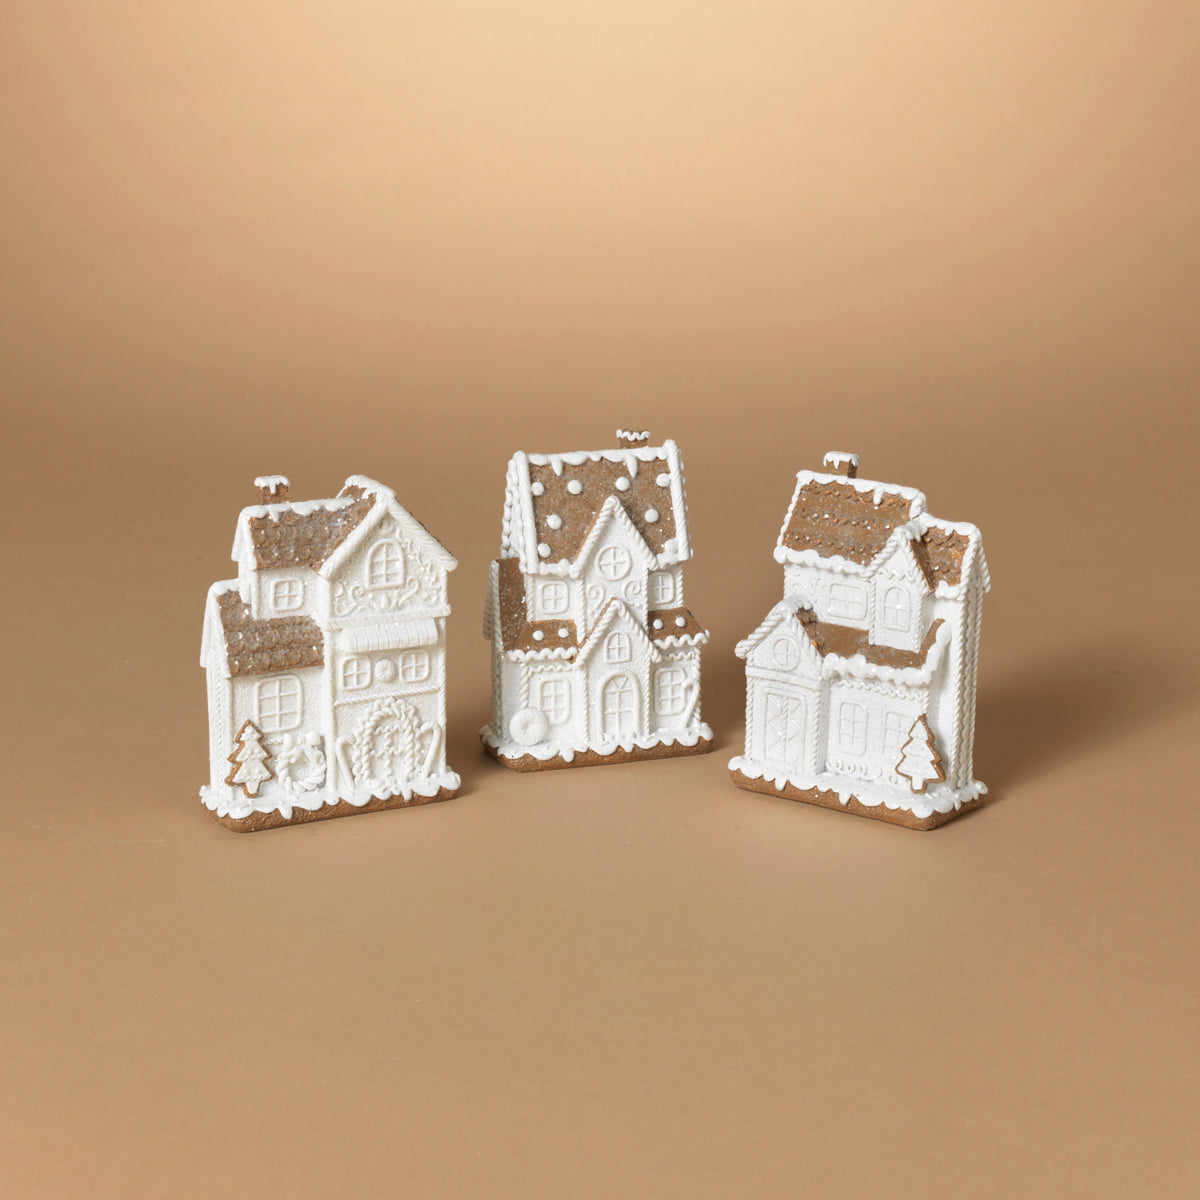 5.5"H Resin Holiday Gingerbread Houses